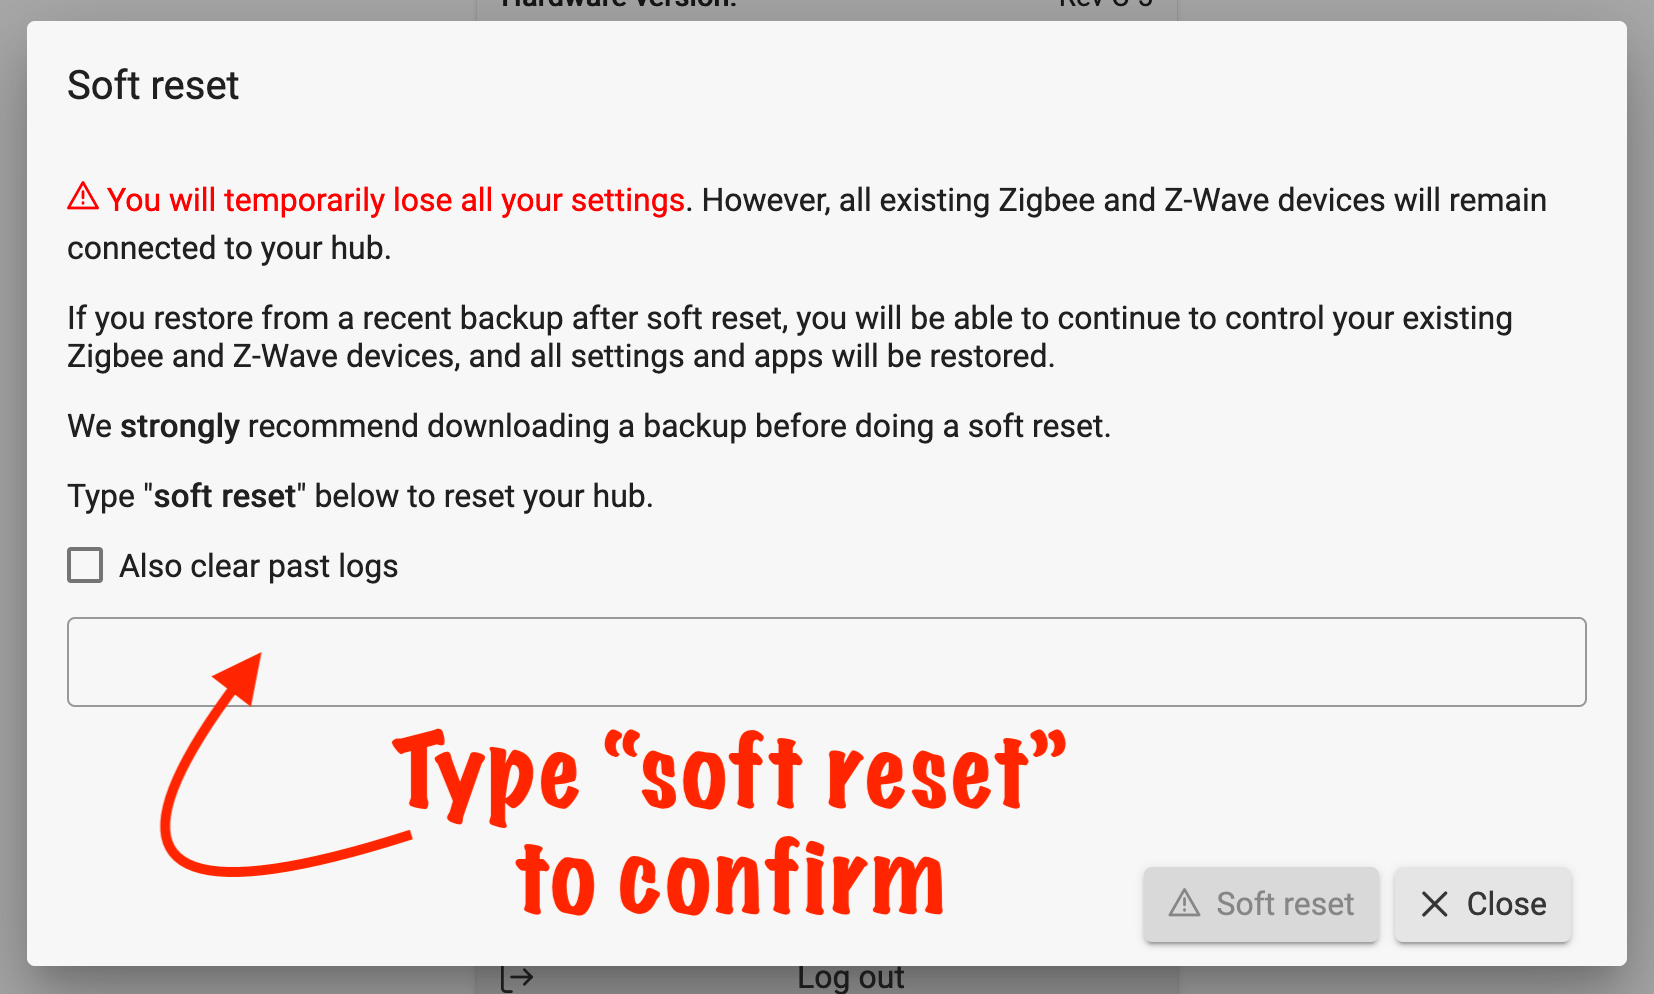 Screenshot of soft reset confirmation in Diagnostic Tool, asking to type 'soft reset' to confirm